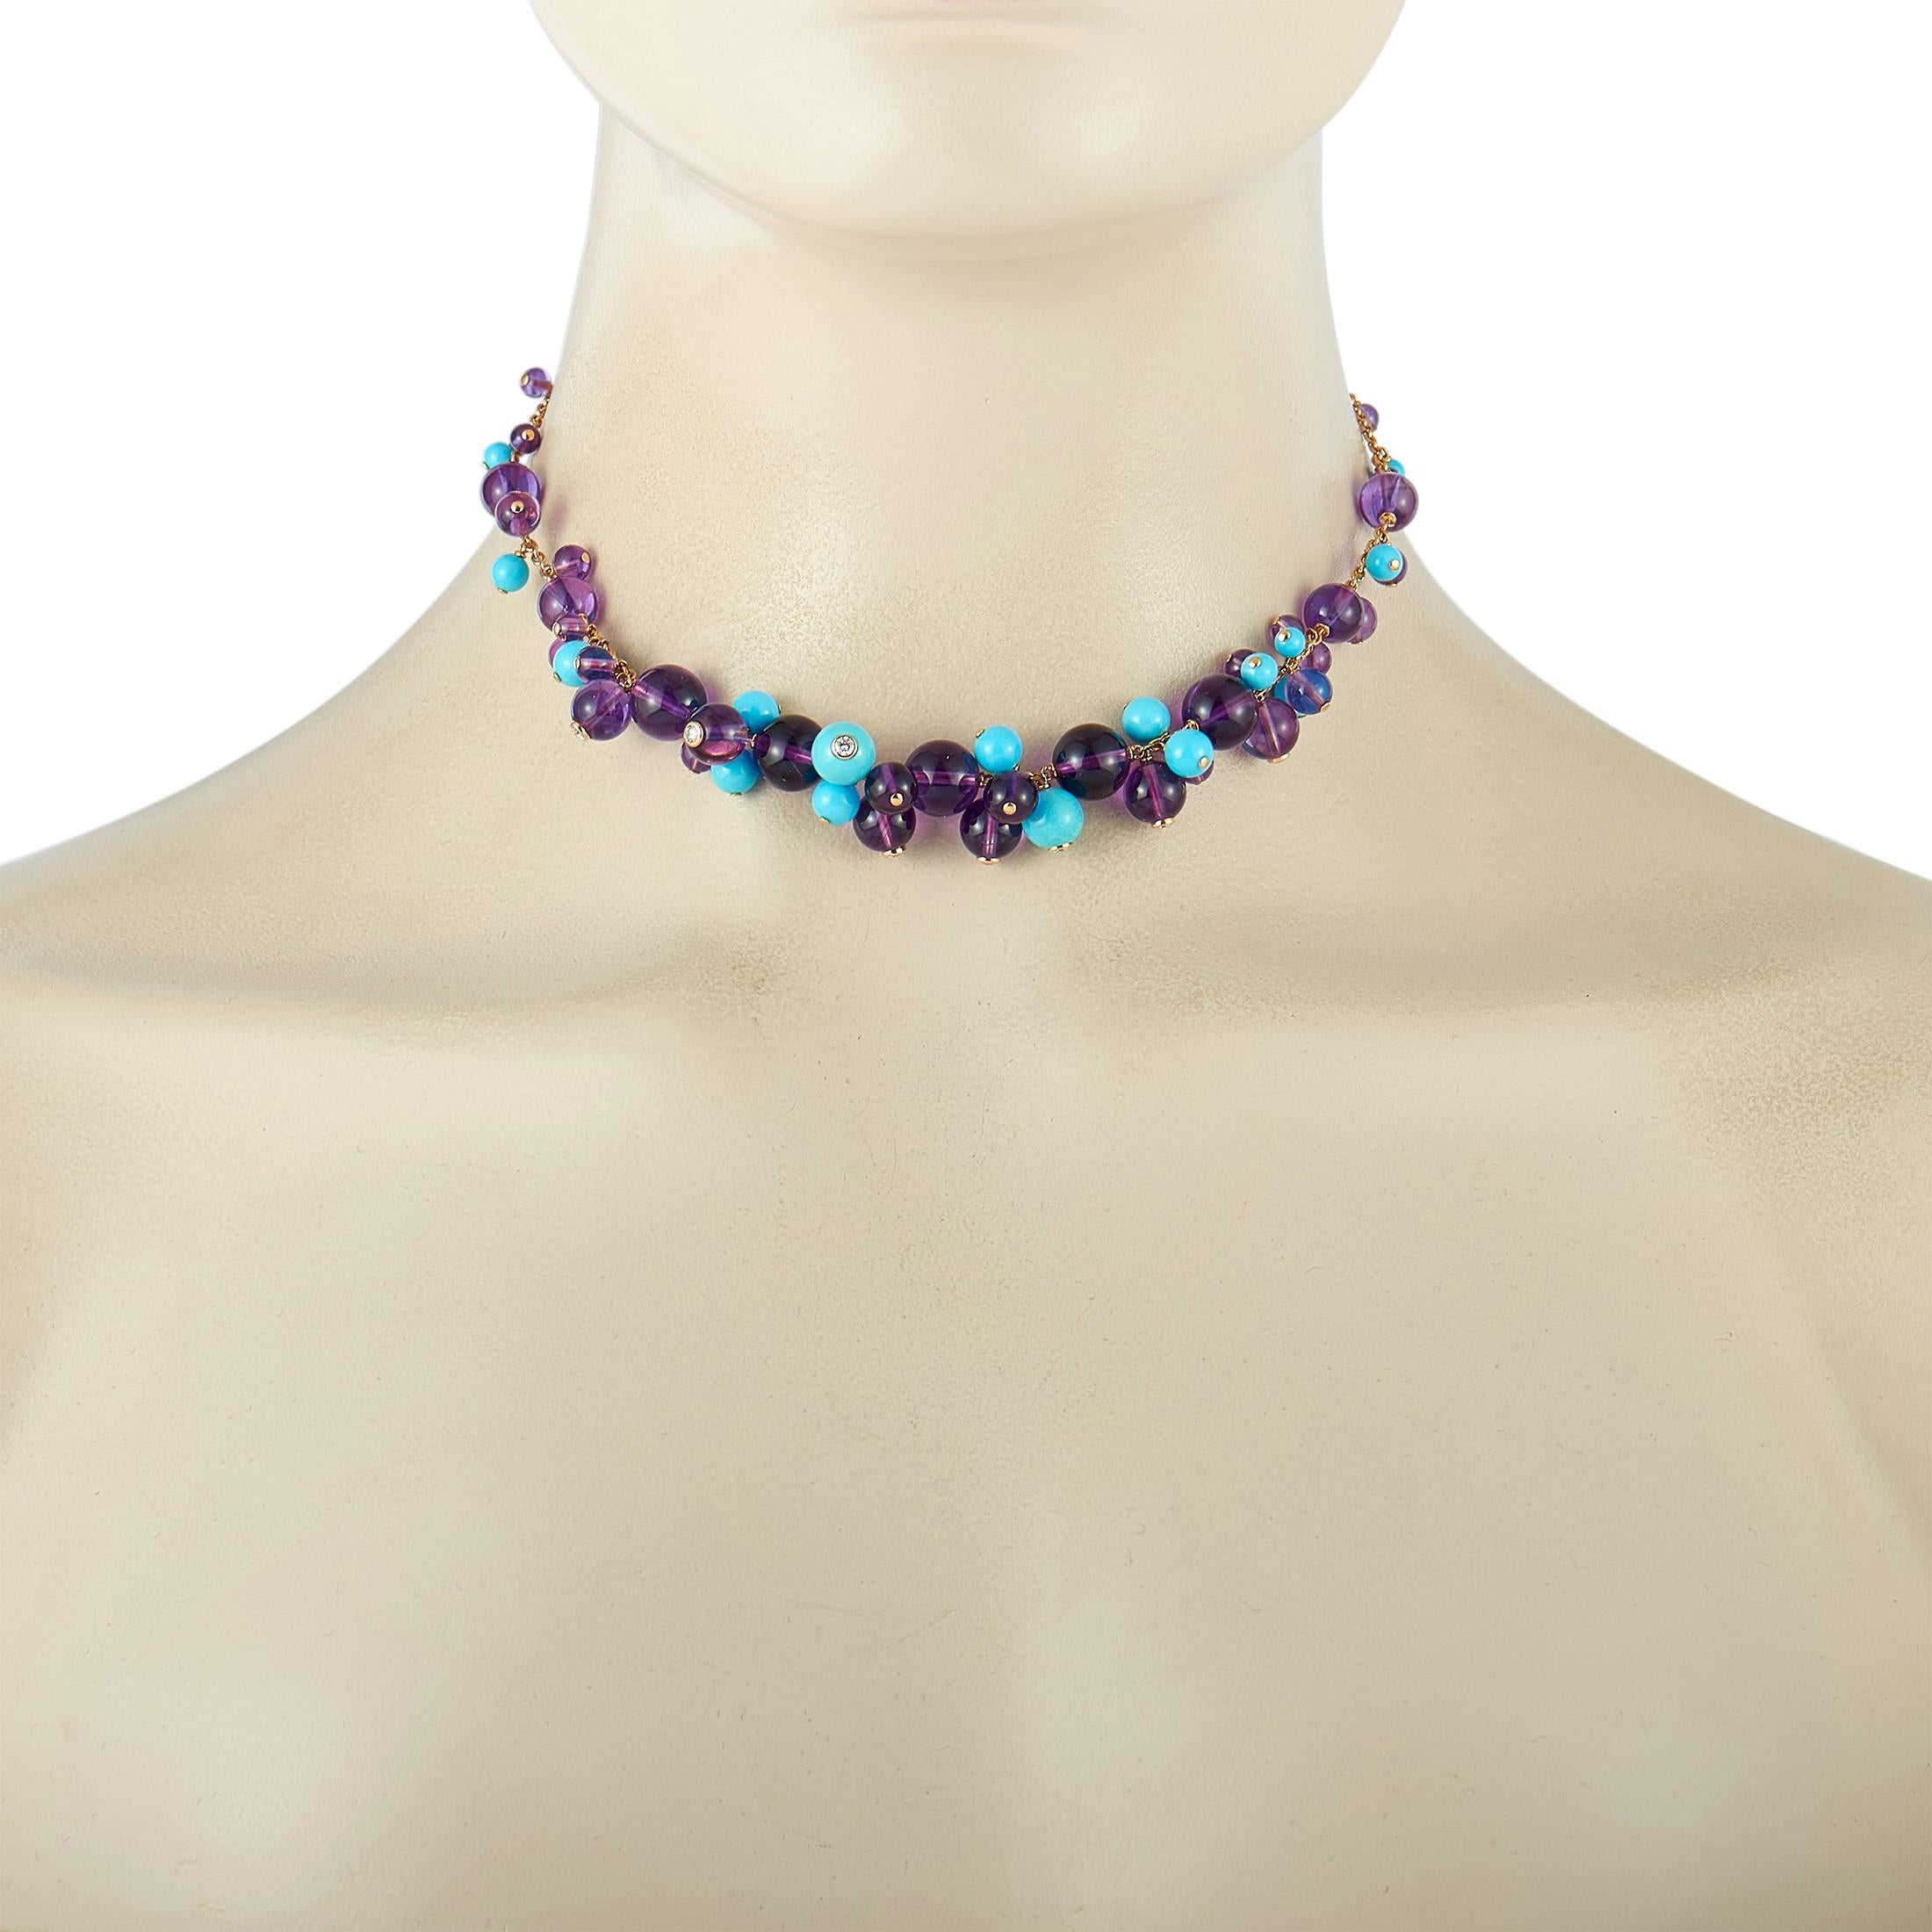 The Cartier “Delices” necklace is made of 18K yellow gold and weighs 34 grams, measuring 15” in length. It is embellished with turquoises, amethysts, and a total of 0.70 carats of diamonds that boast E color and VS1 clarity.

This jewelry piece is